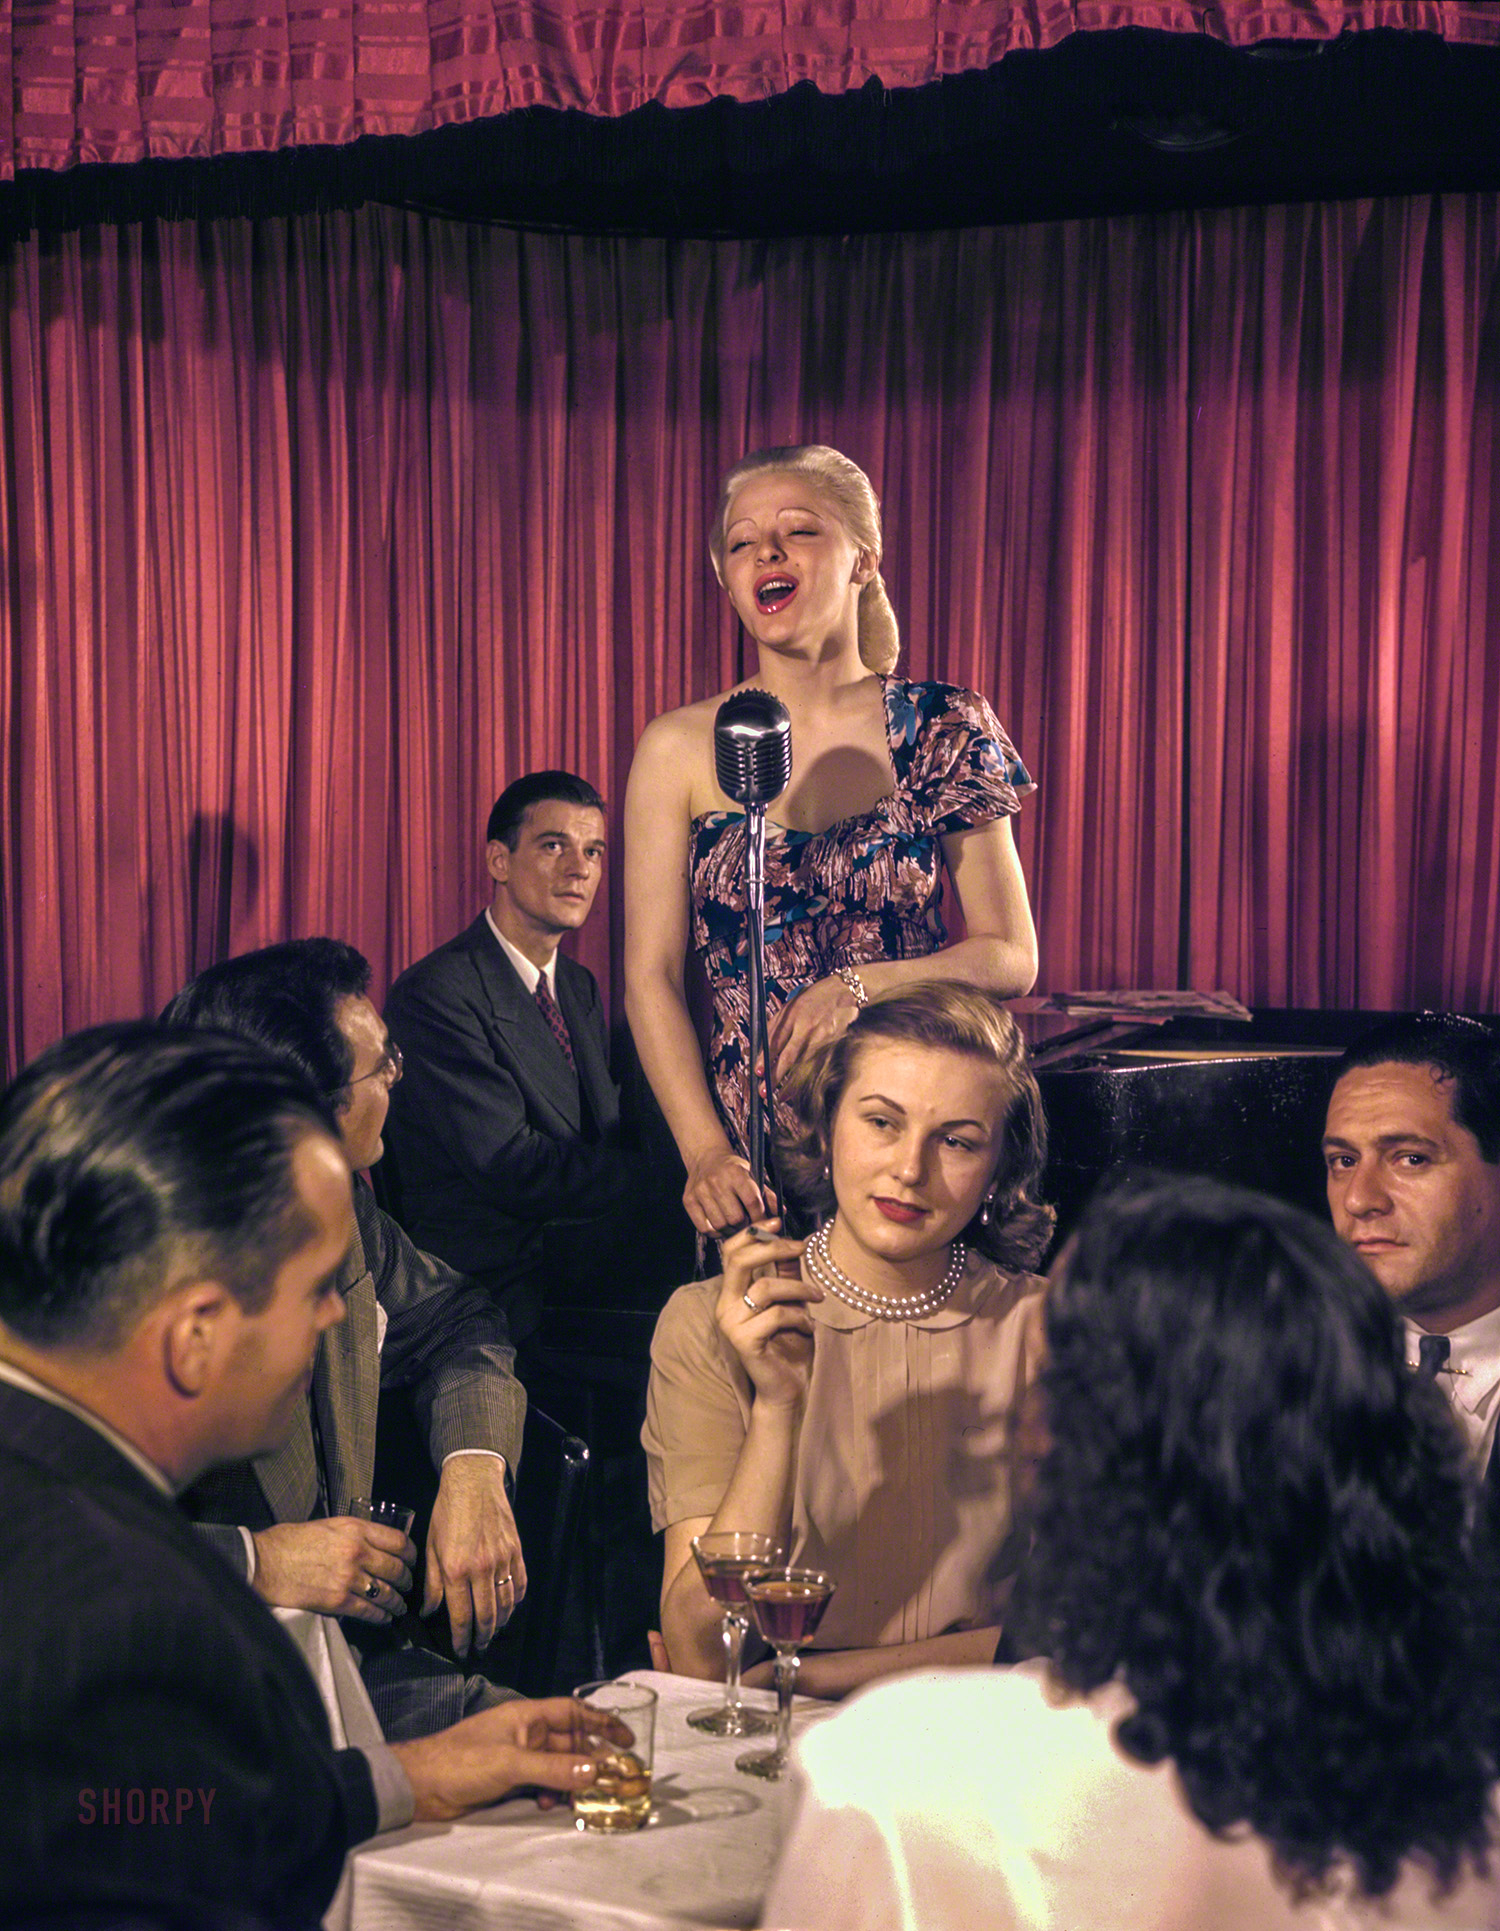 New York circa 1948. "Jazz singer at the Onyx Club, 52nd Street." We trust that this canary won't stay unidentified for long. Medium format Kodachrome transparency by Down Beat photographer William Gottlieb. View full size.